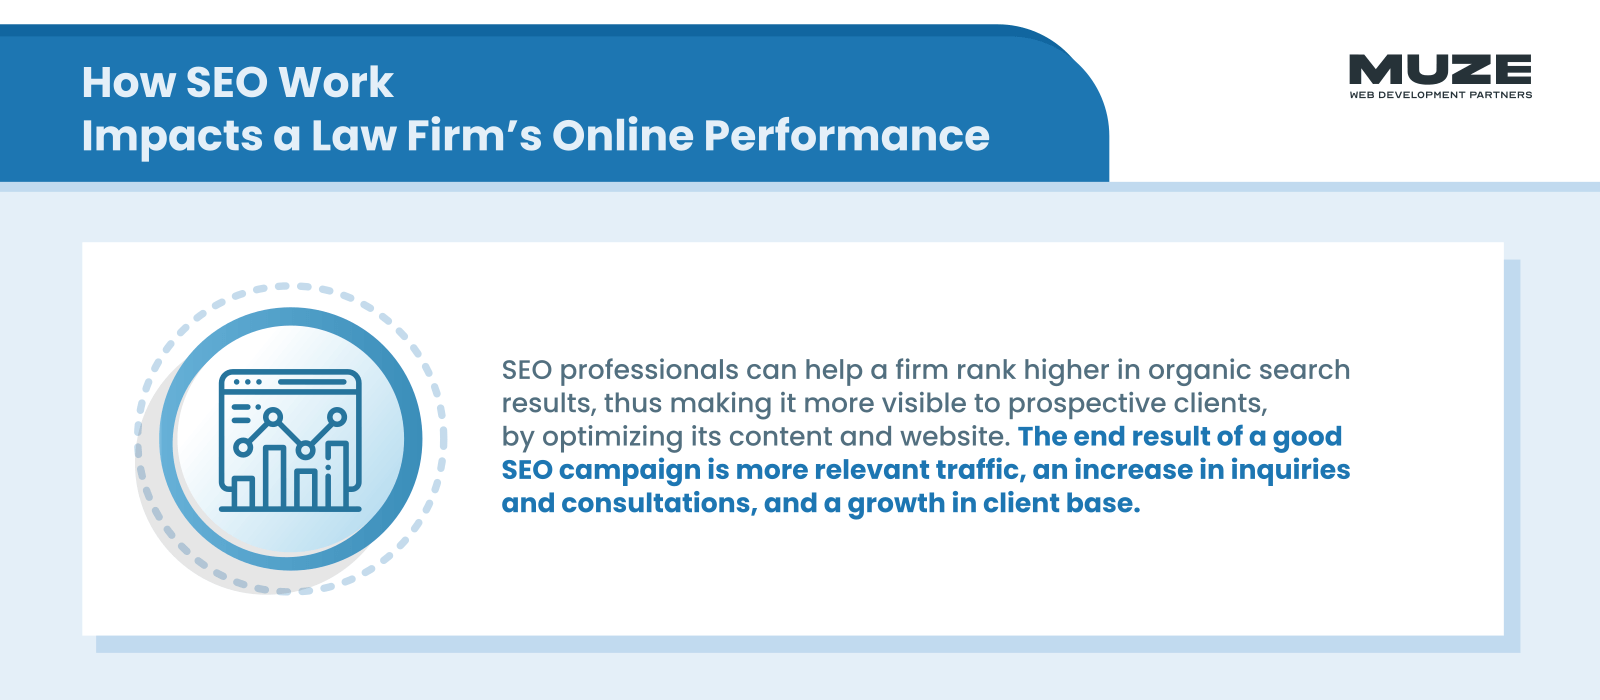 How SEO Work Impacts a Law Firm's Online Performance - Law Firm SEO Services